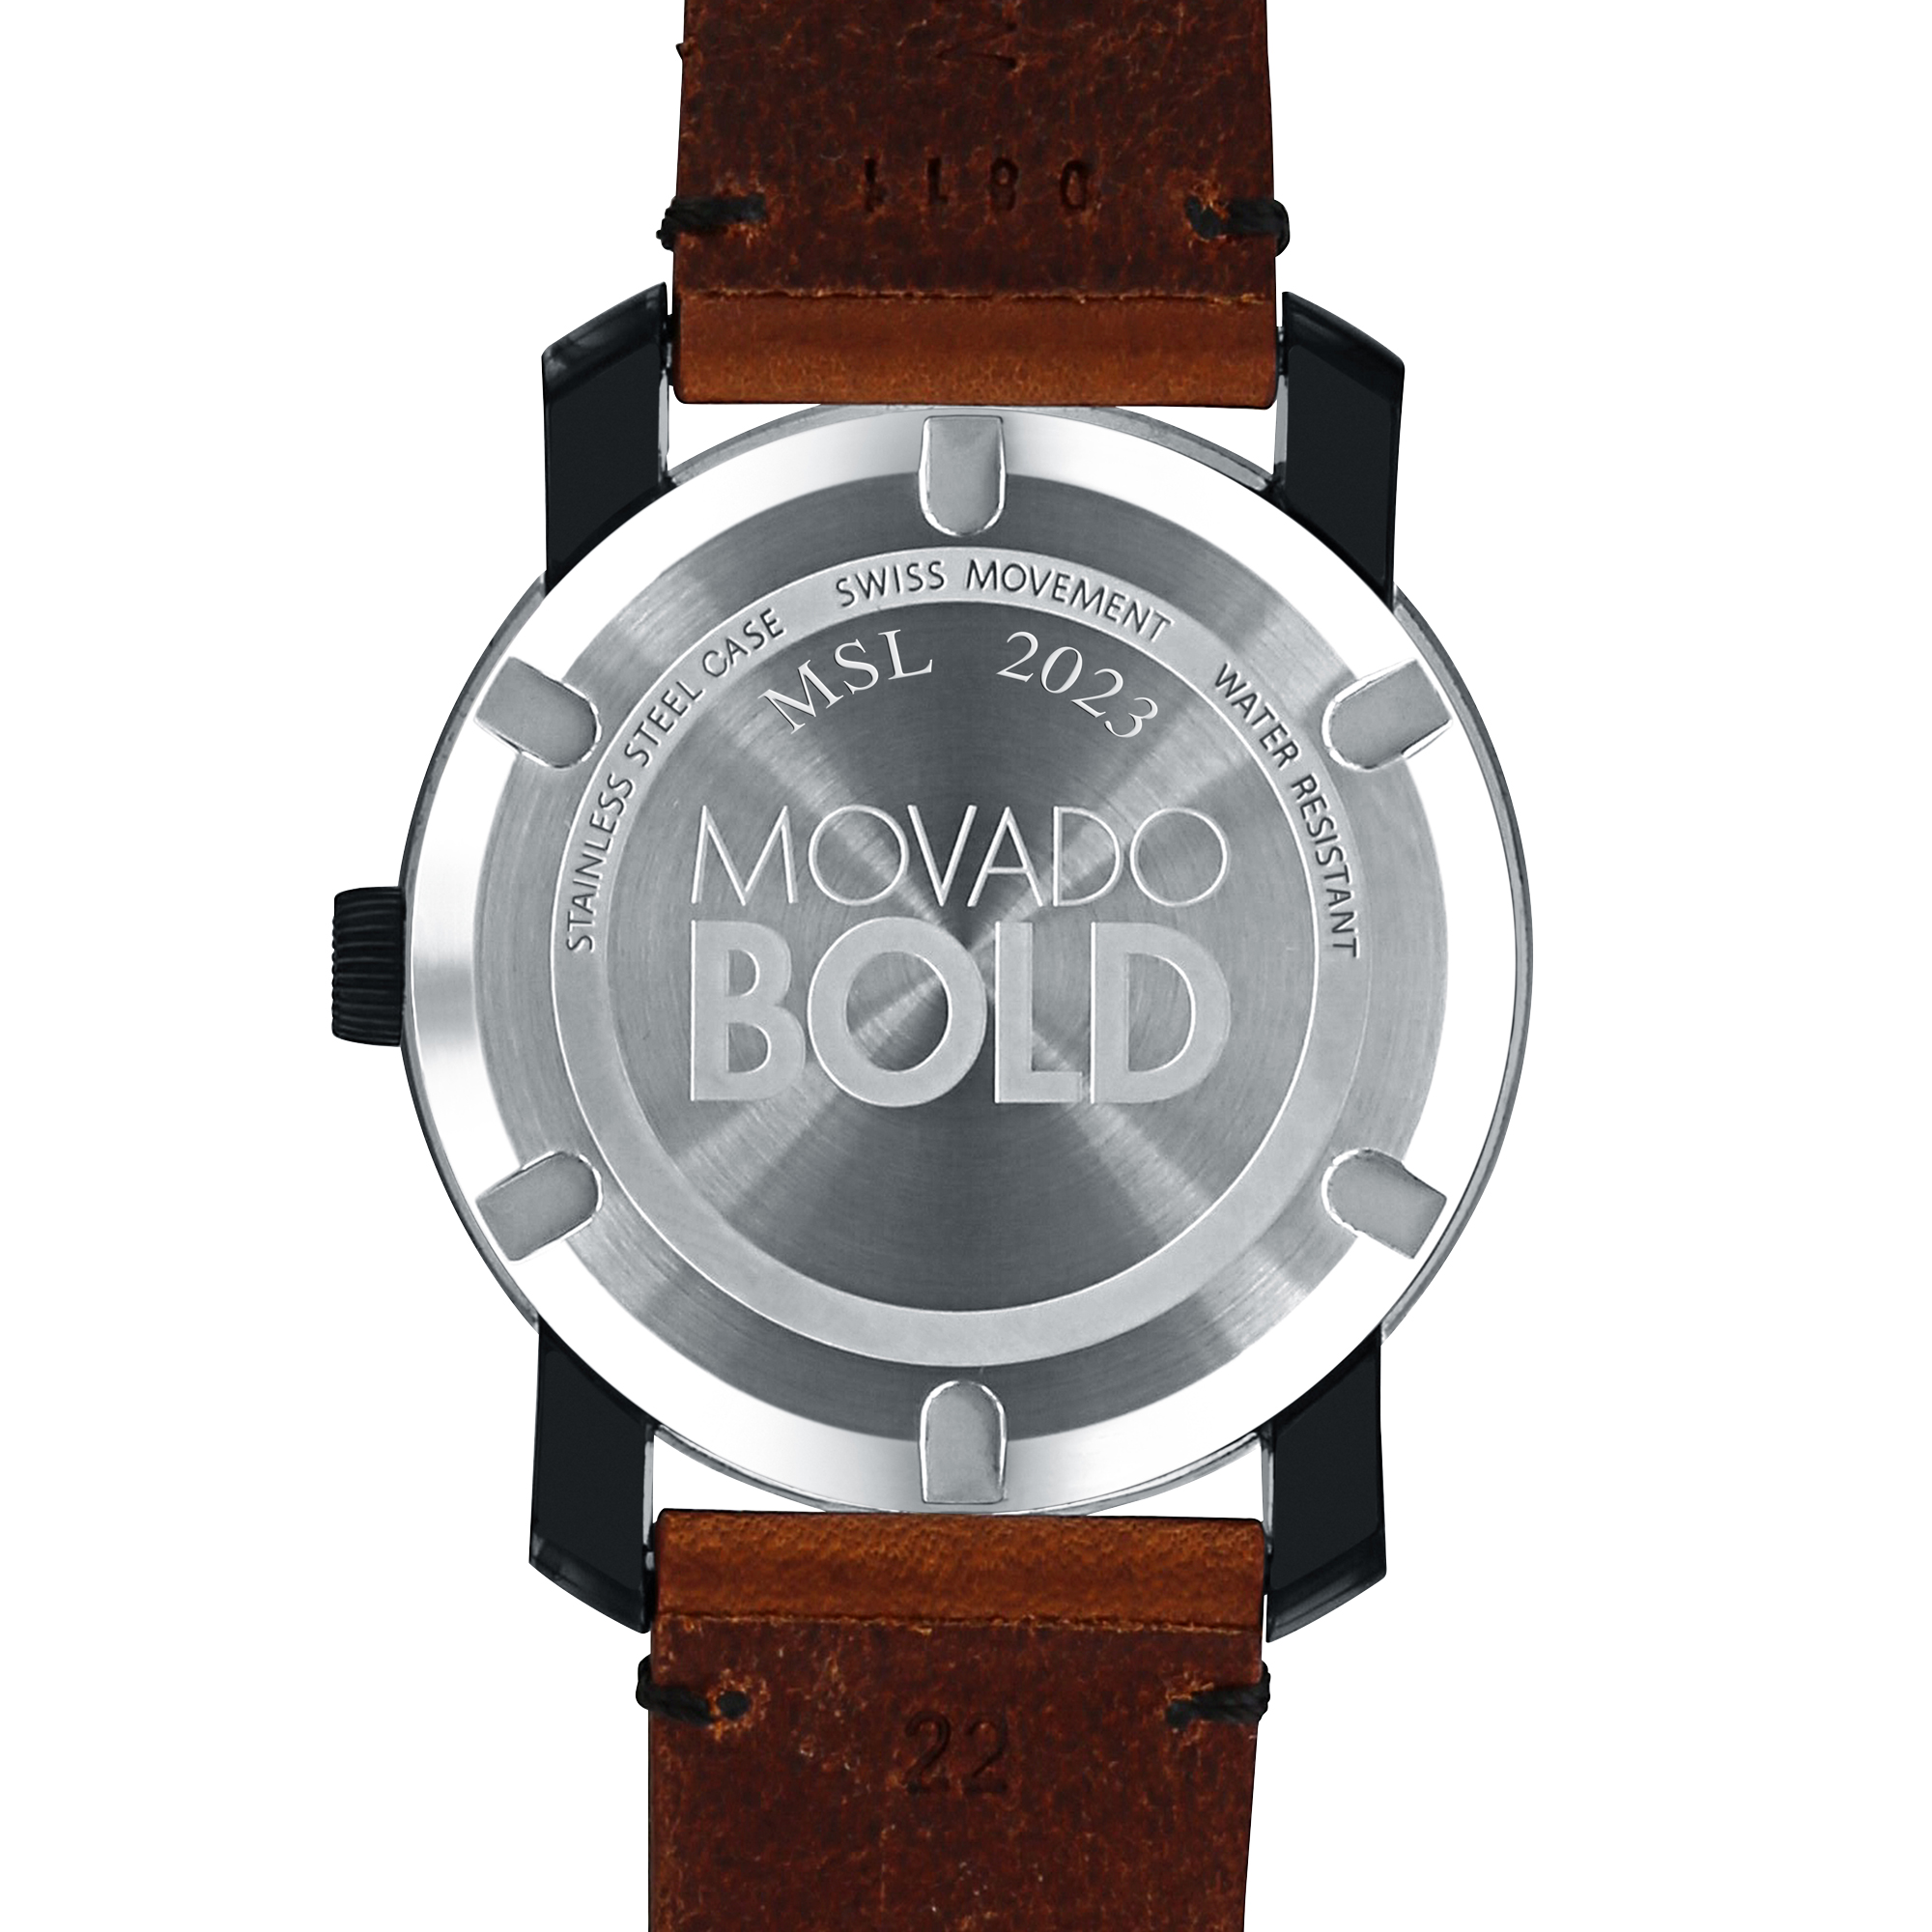 Emory University Men's Movado BOLD with Brown Leather Strap - Image 3